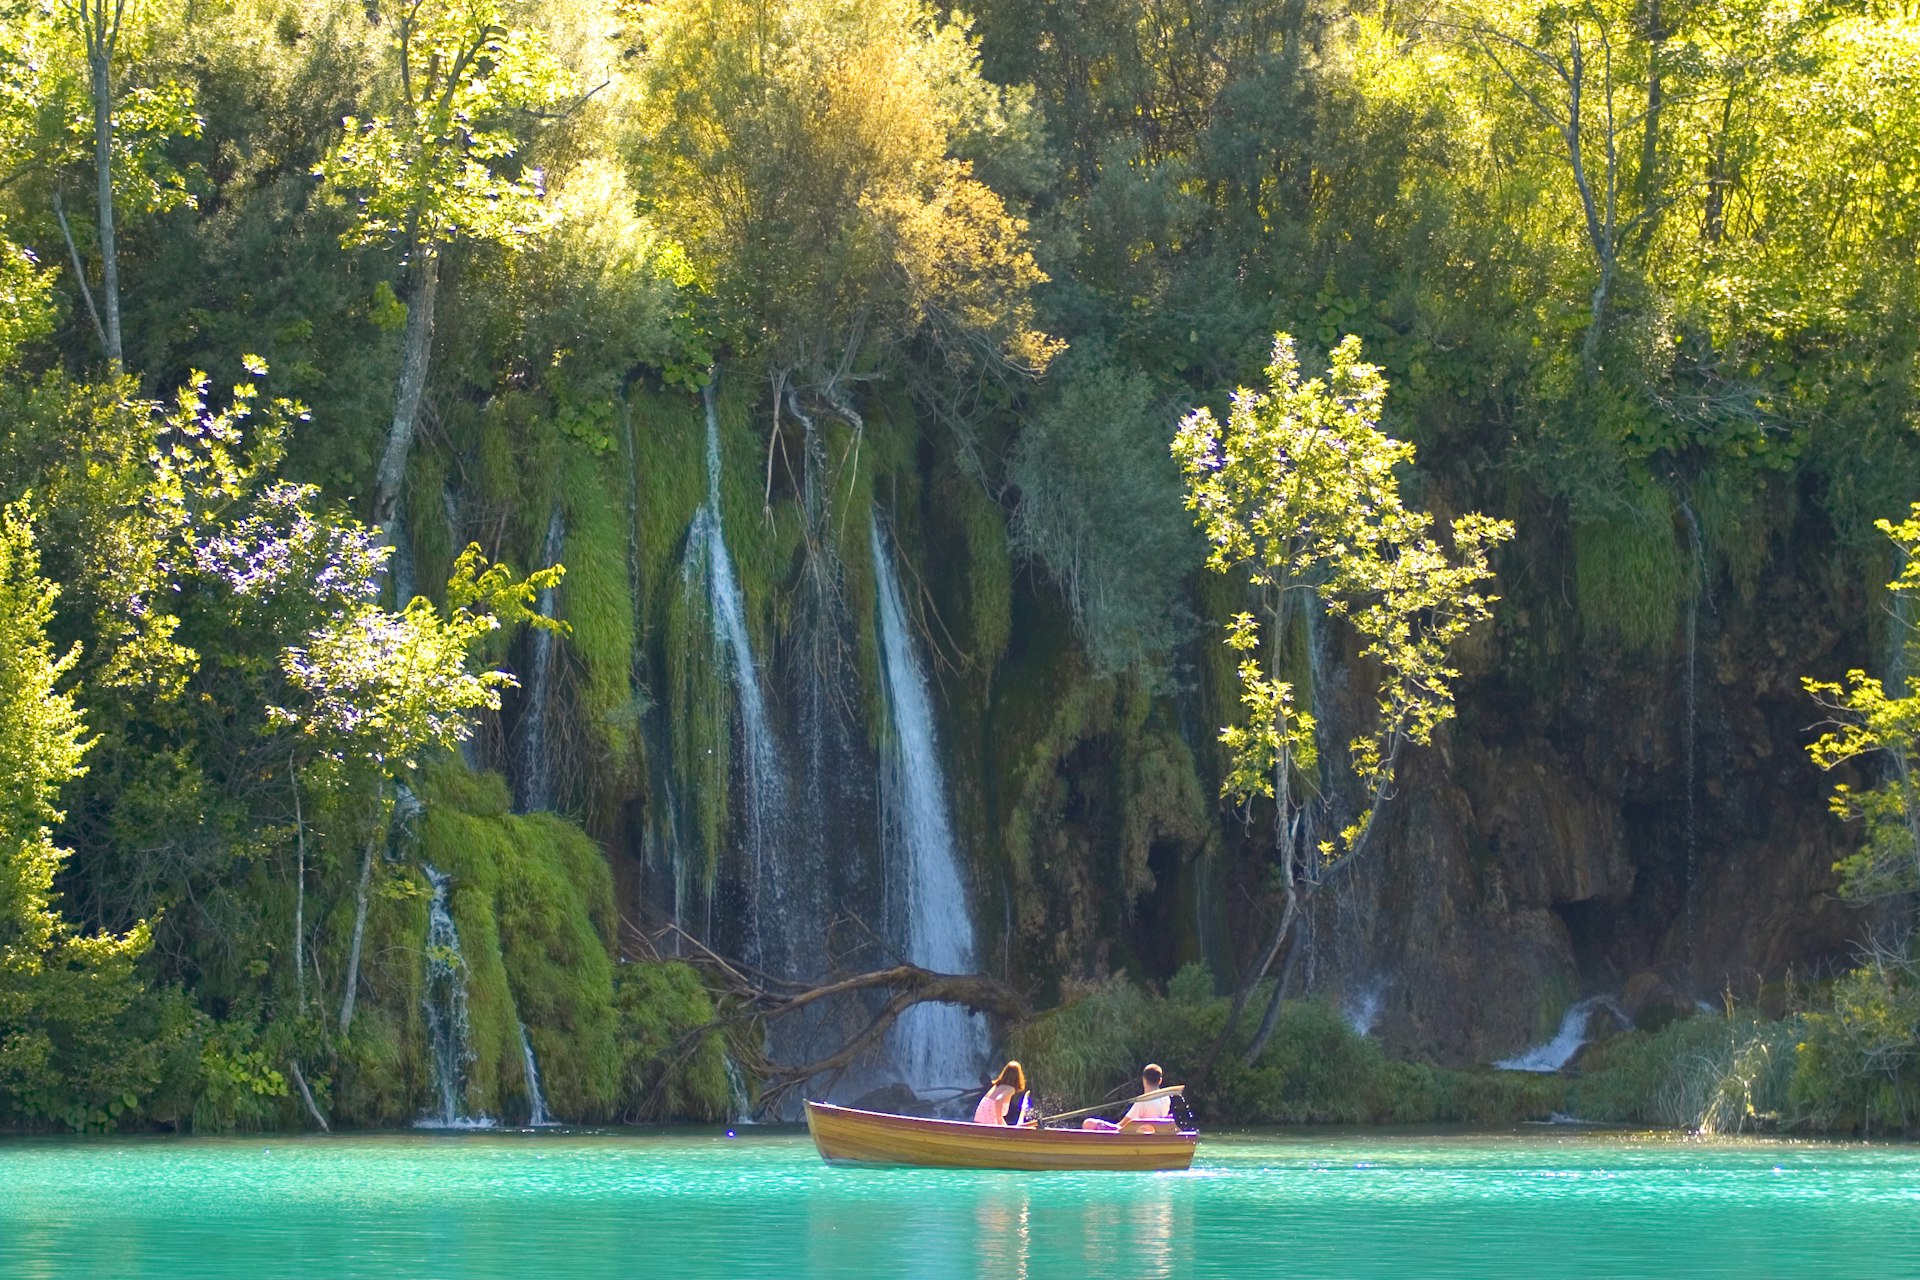 Two people in a row boat pause on a lake to watch a waterfall cascade